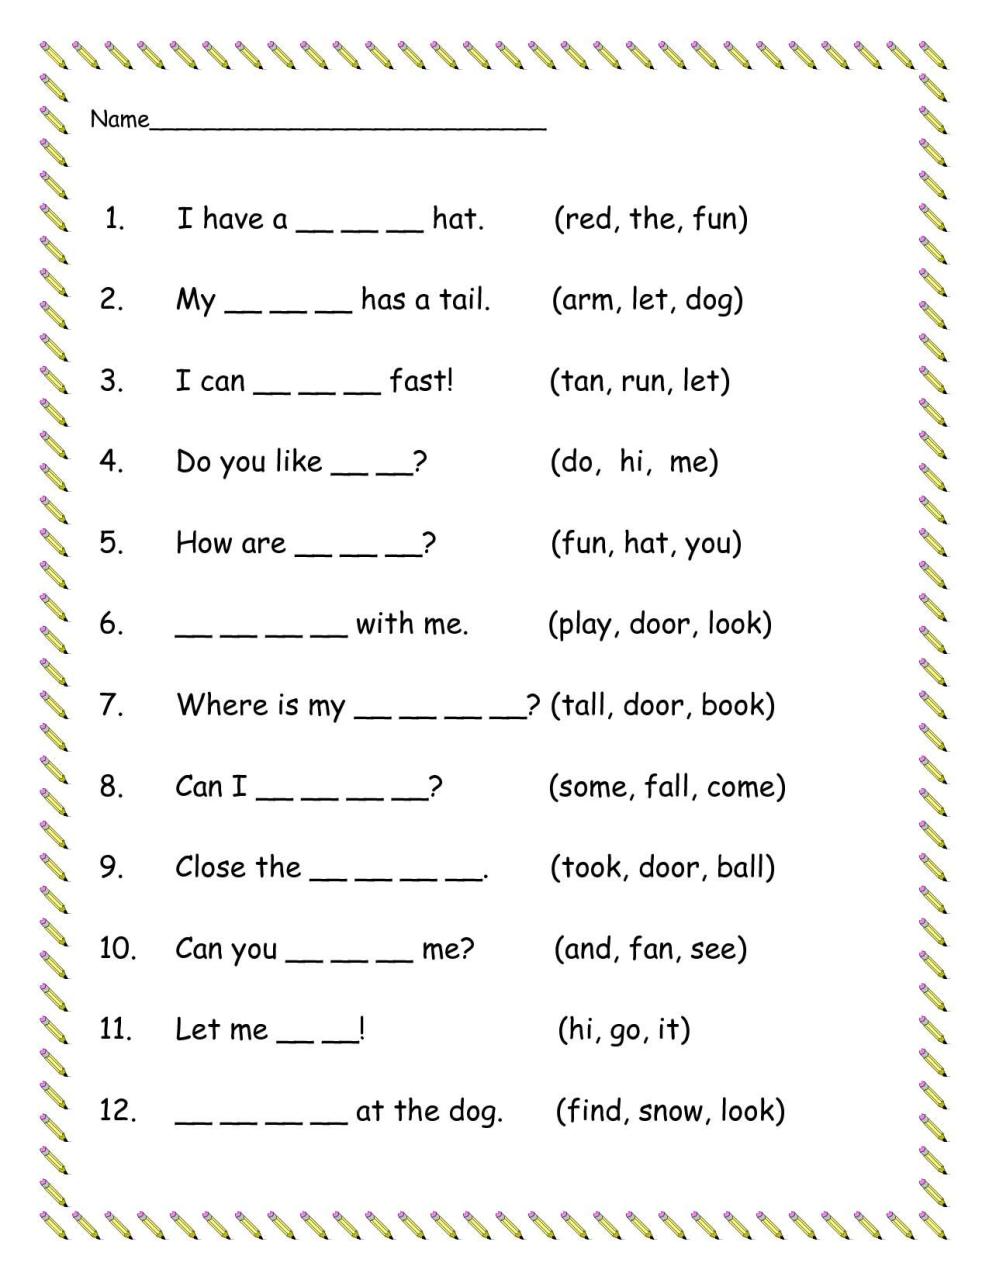 Worksheet For Class 1 Pdf English